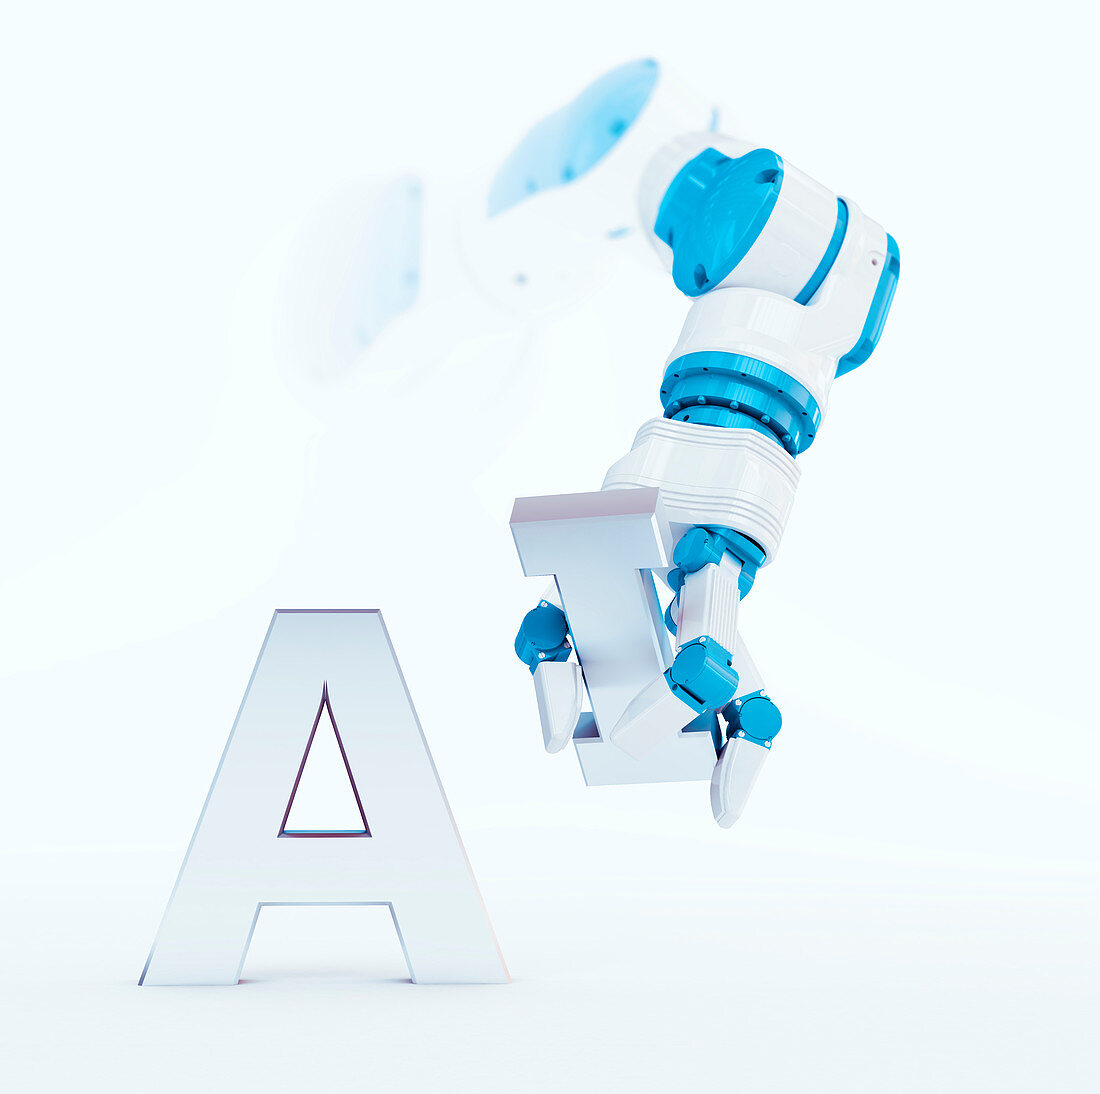 Robotic hand and the letters A and I, illustration